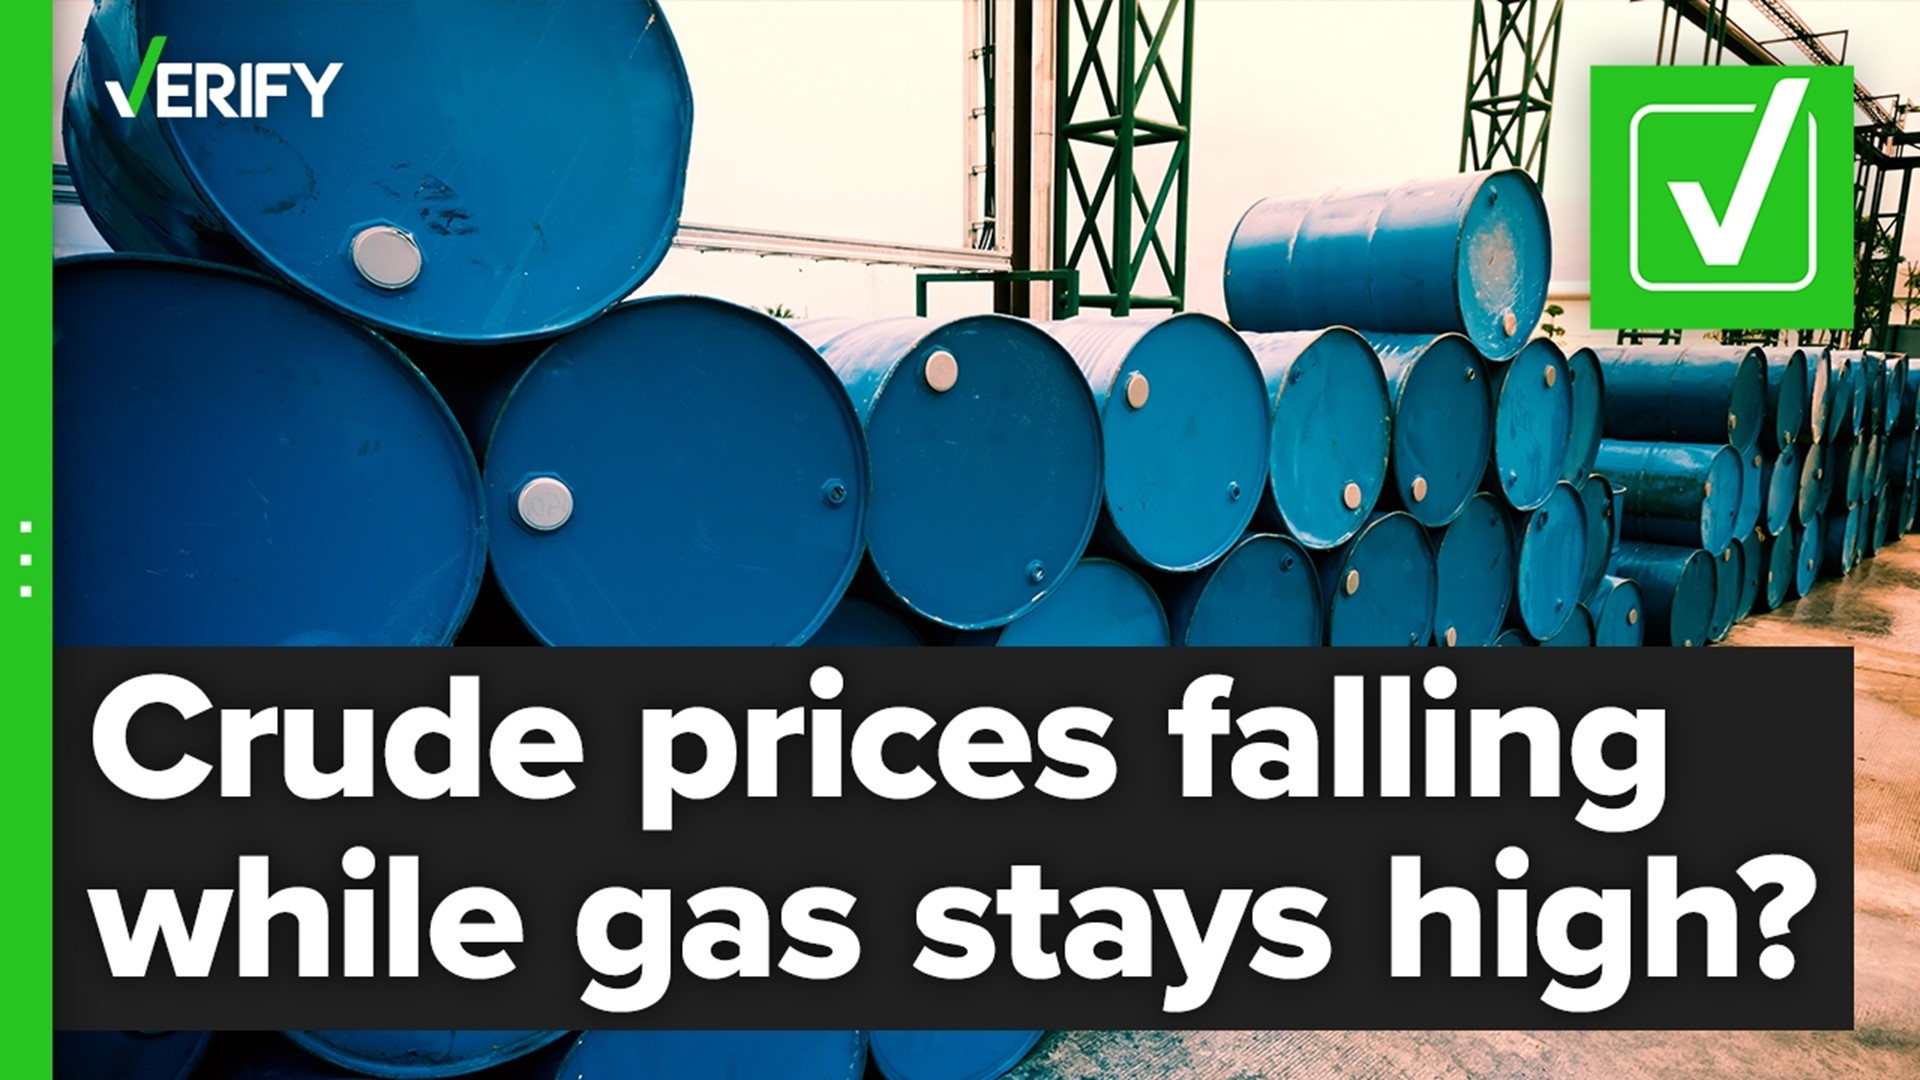 President Biden says the oil industry is taking advantage of consumers by keeping gas prices high even as crude prices fall; the industry says it’s a natural lag.